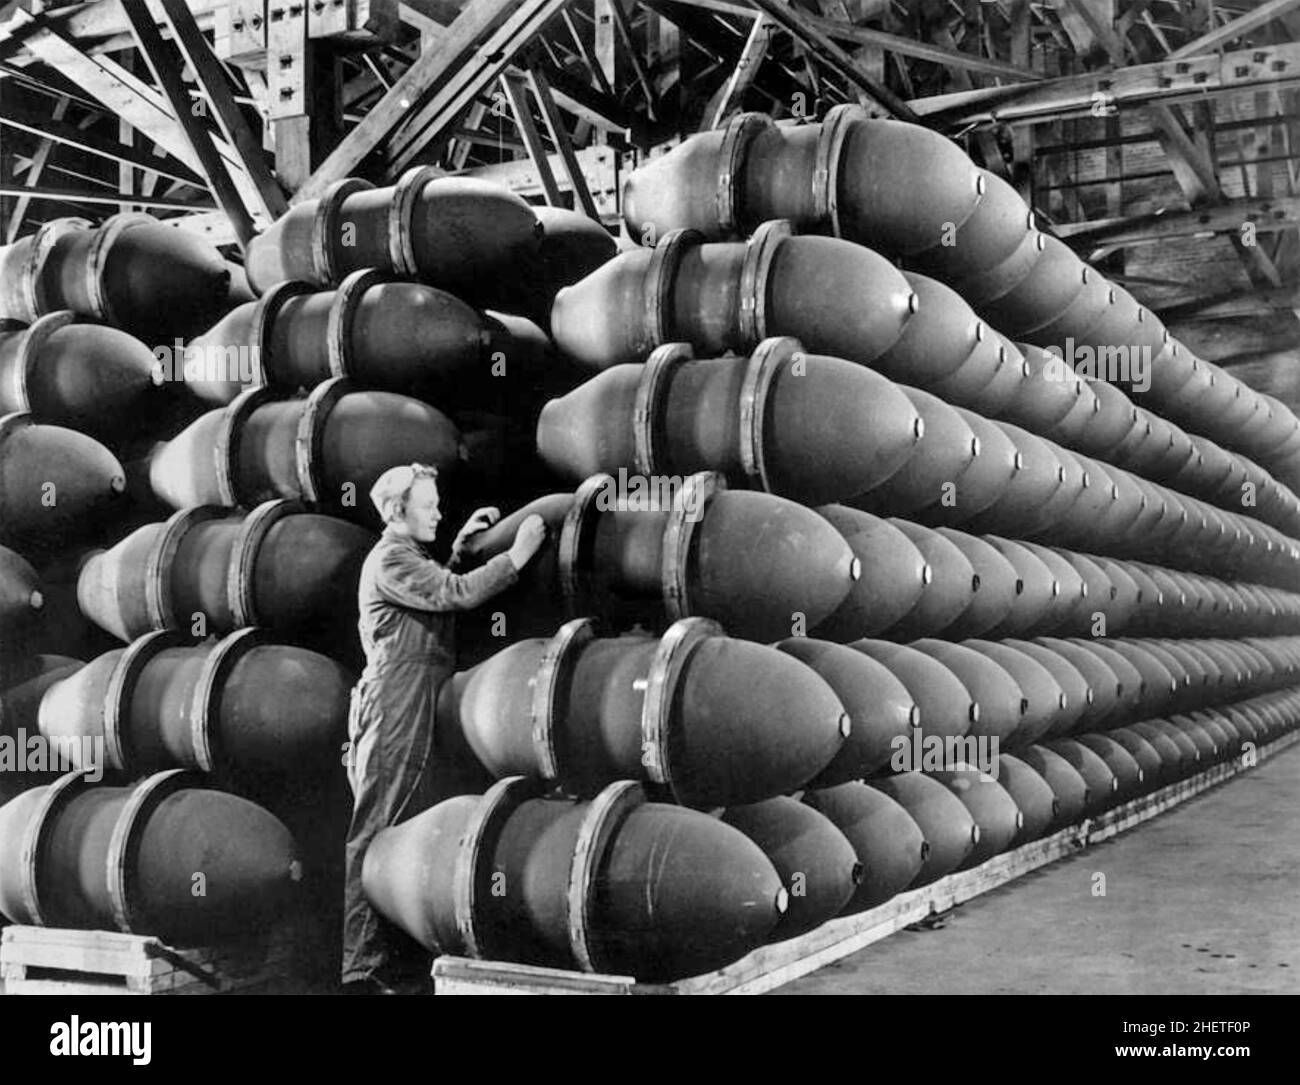 MUNITIONS WORKER. A worker at the US Army Nebraska Ordnance Plant in Omaha, Nebraska, with 1000 lb bomb cases in May 1943 Stock Photo